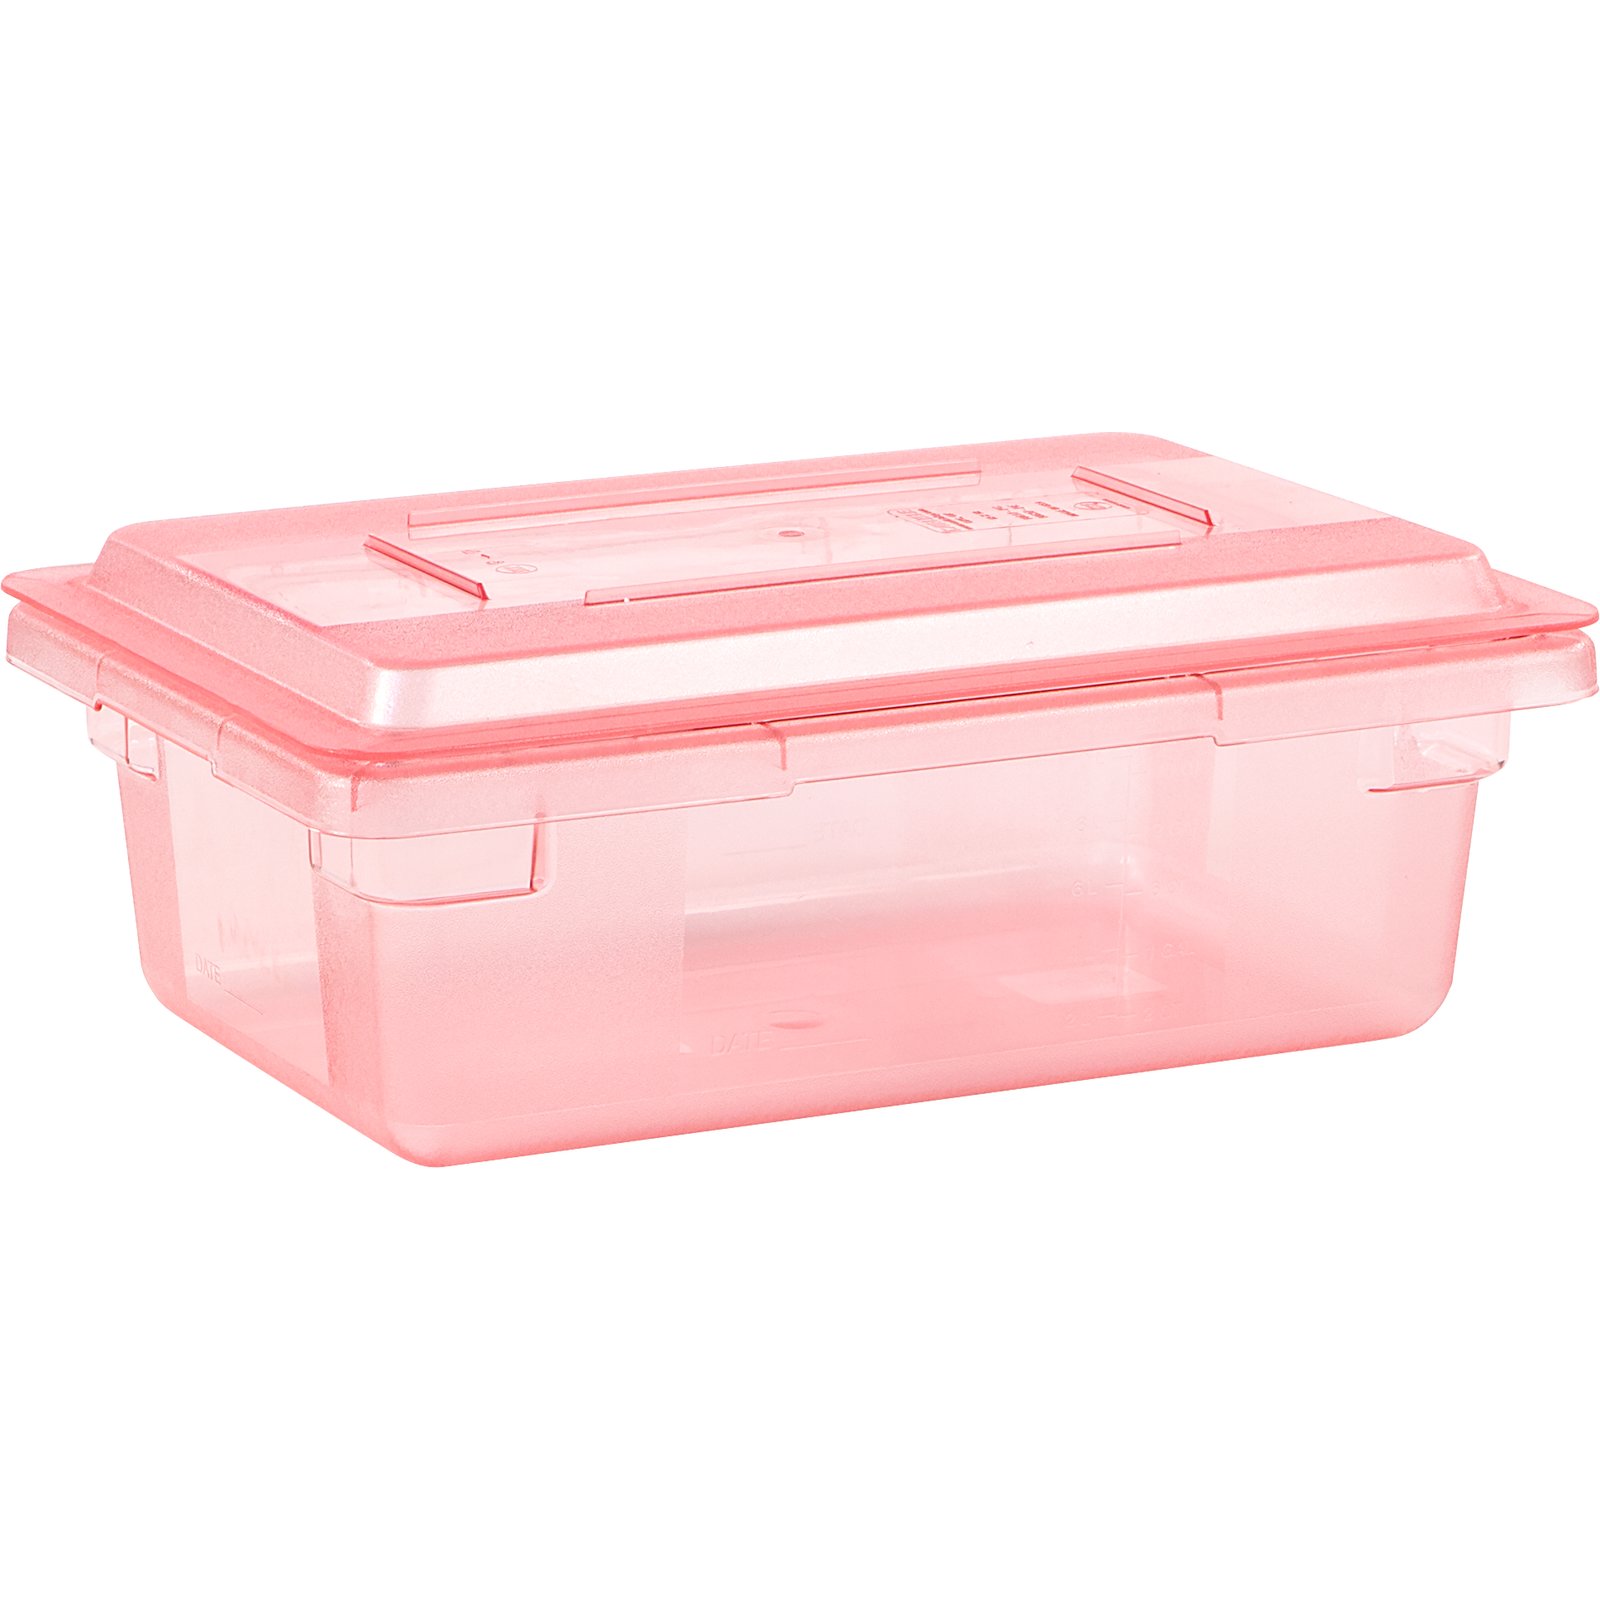 Storage Container, Red, 18 Gallons